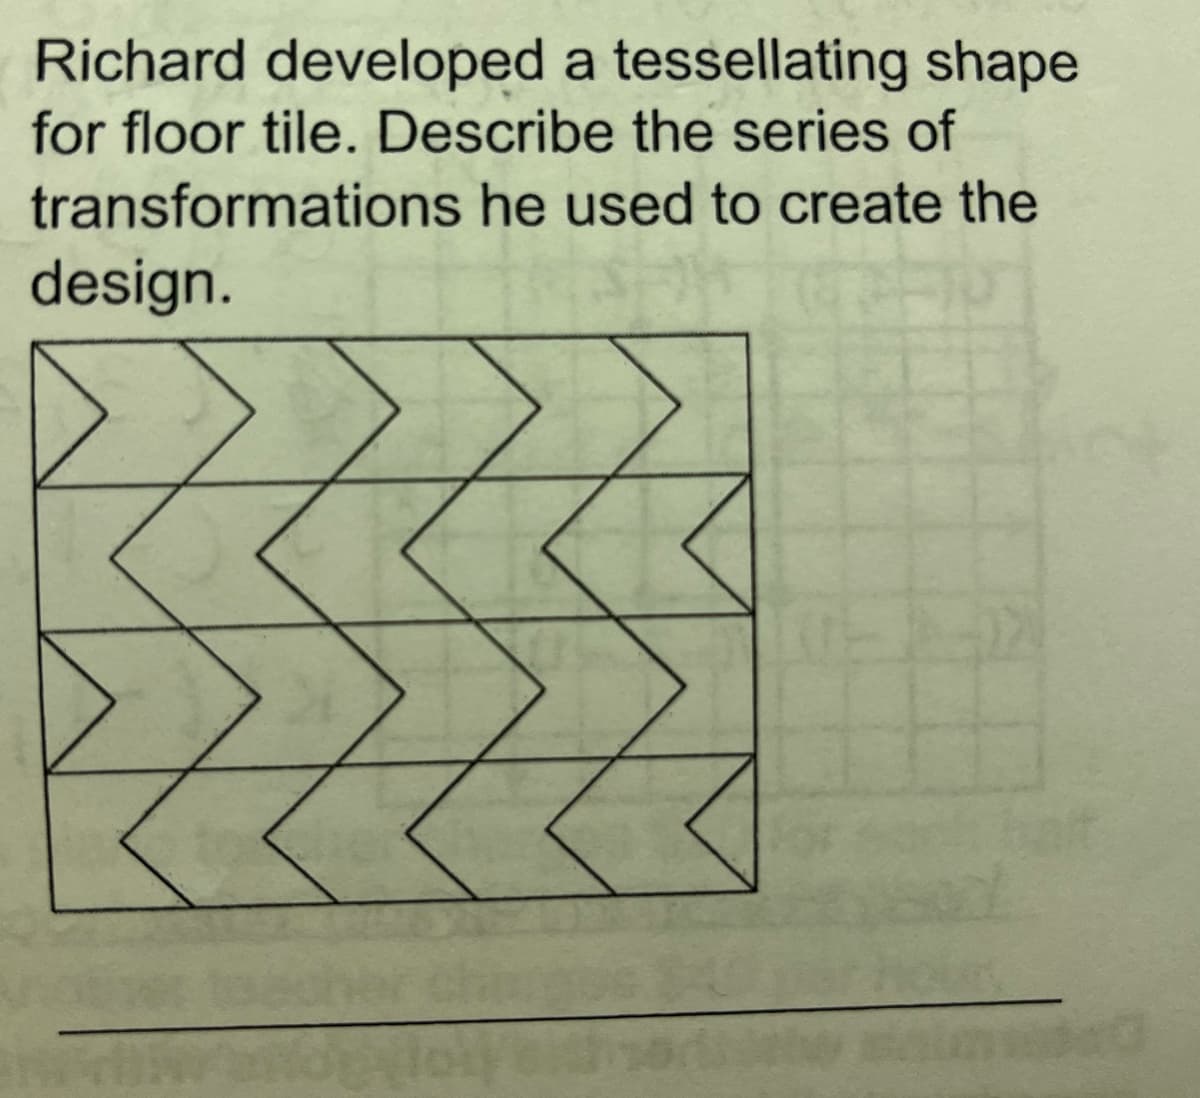 Richard developed a tessellating shape
for floor tile. Describe the series of
transformations he used to create the
design.
